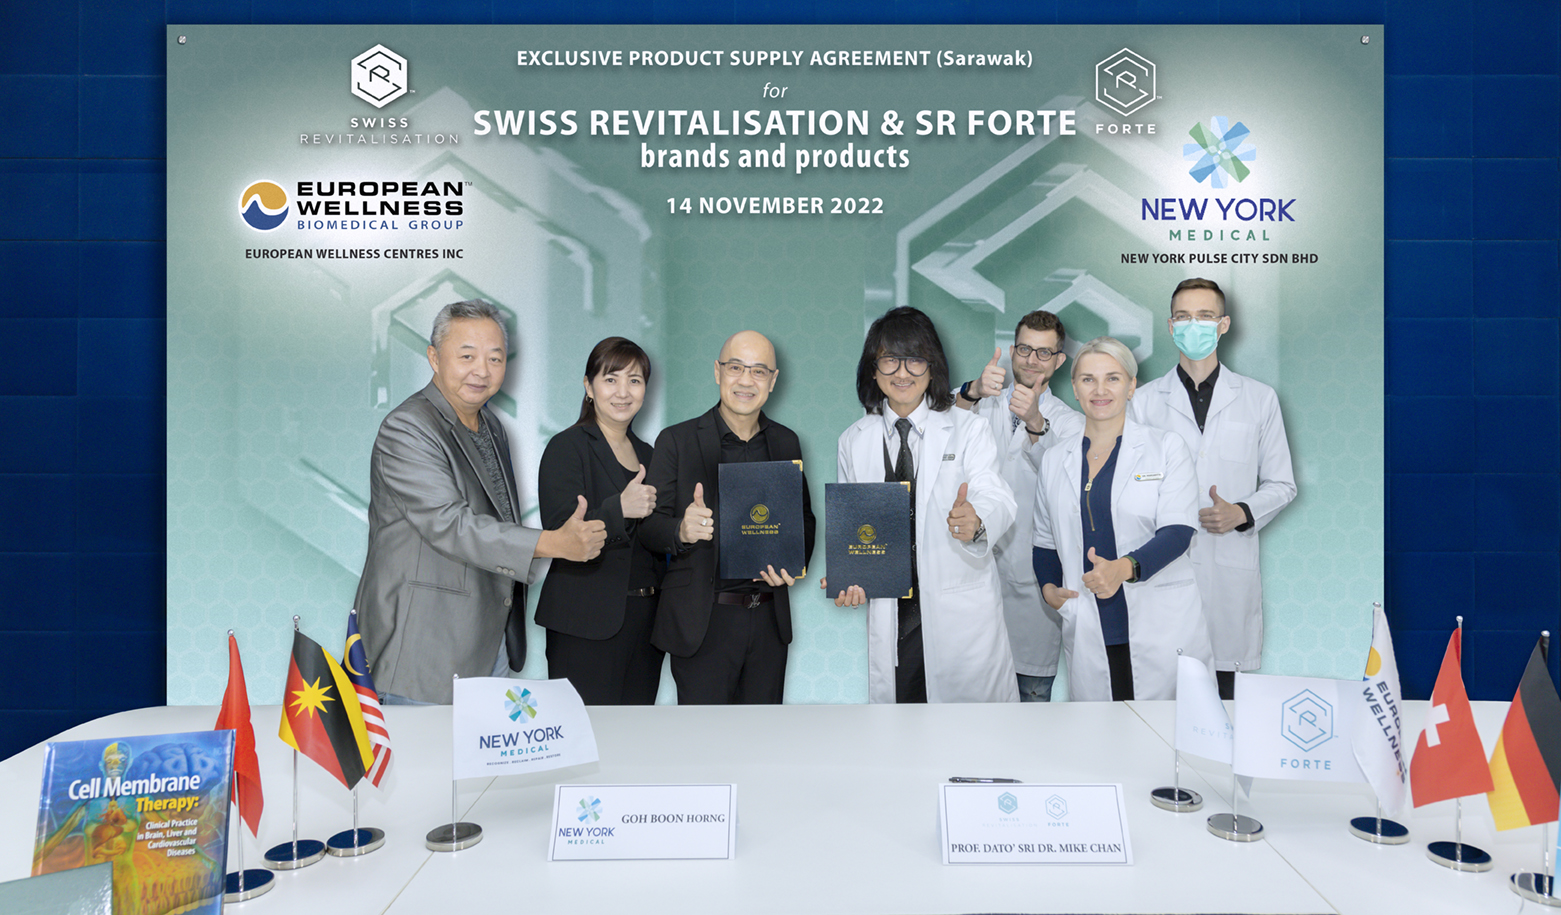 Strategic Collaboration between Swiss Revitalisation, SR Forte, and New York Medical in Sarawak, Malaysia!